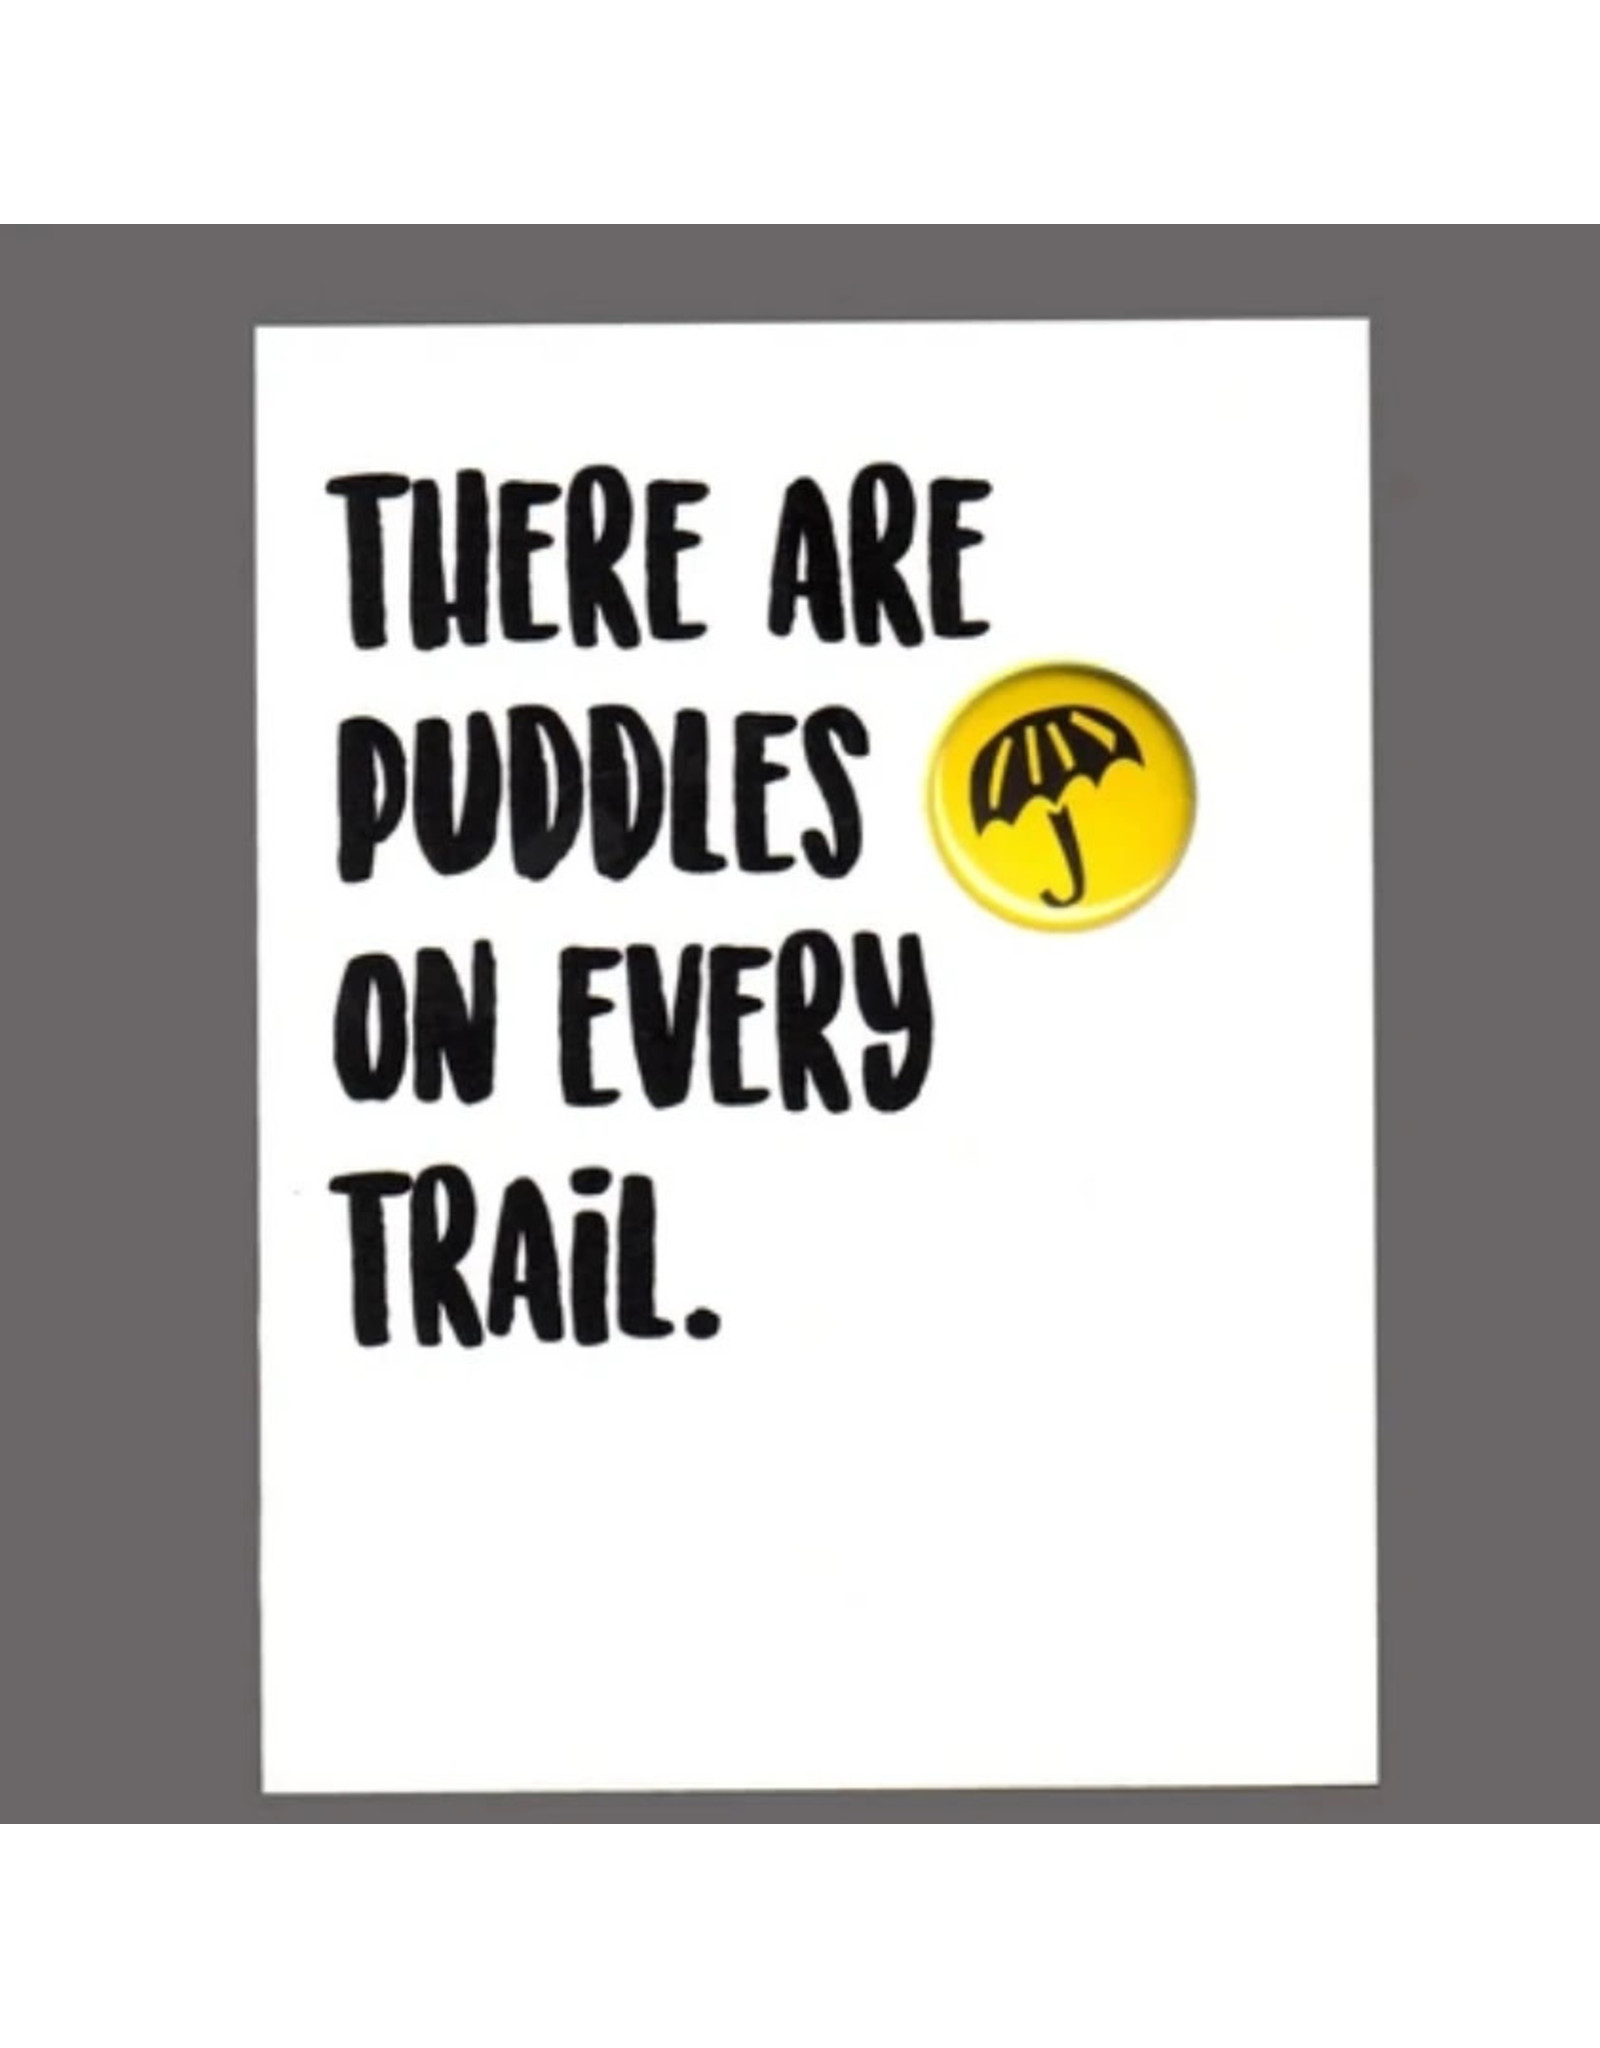 Greeting Card - "There Are Puddles on Every Trail"